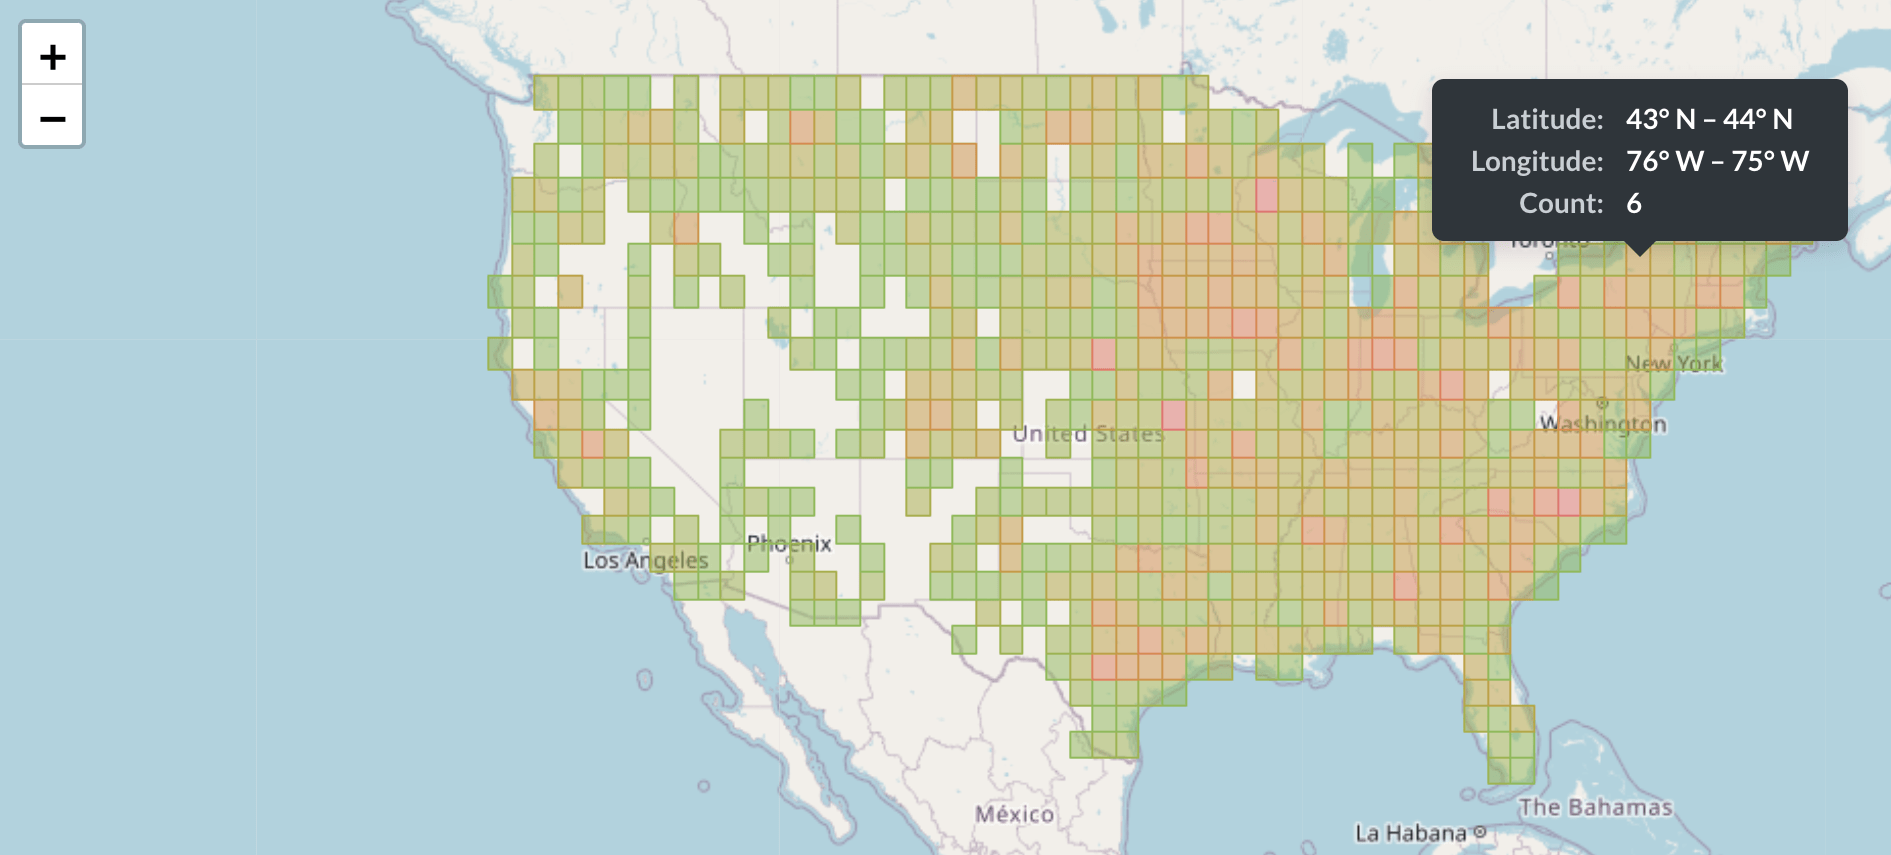 <em>Fig. 7</em>. Map of USA exemplifying a grid map with a bin size of 1 degree. The red areas indicate a greater concentration of data points.